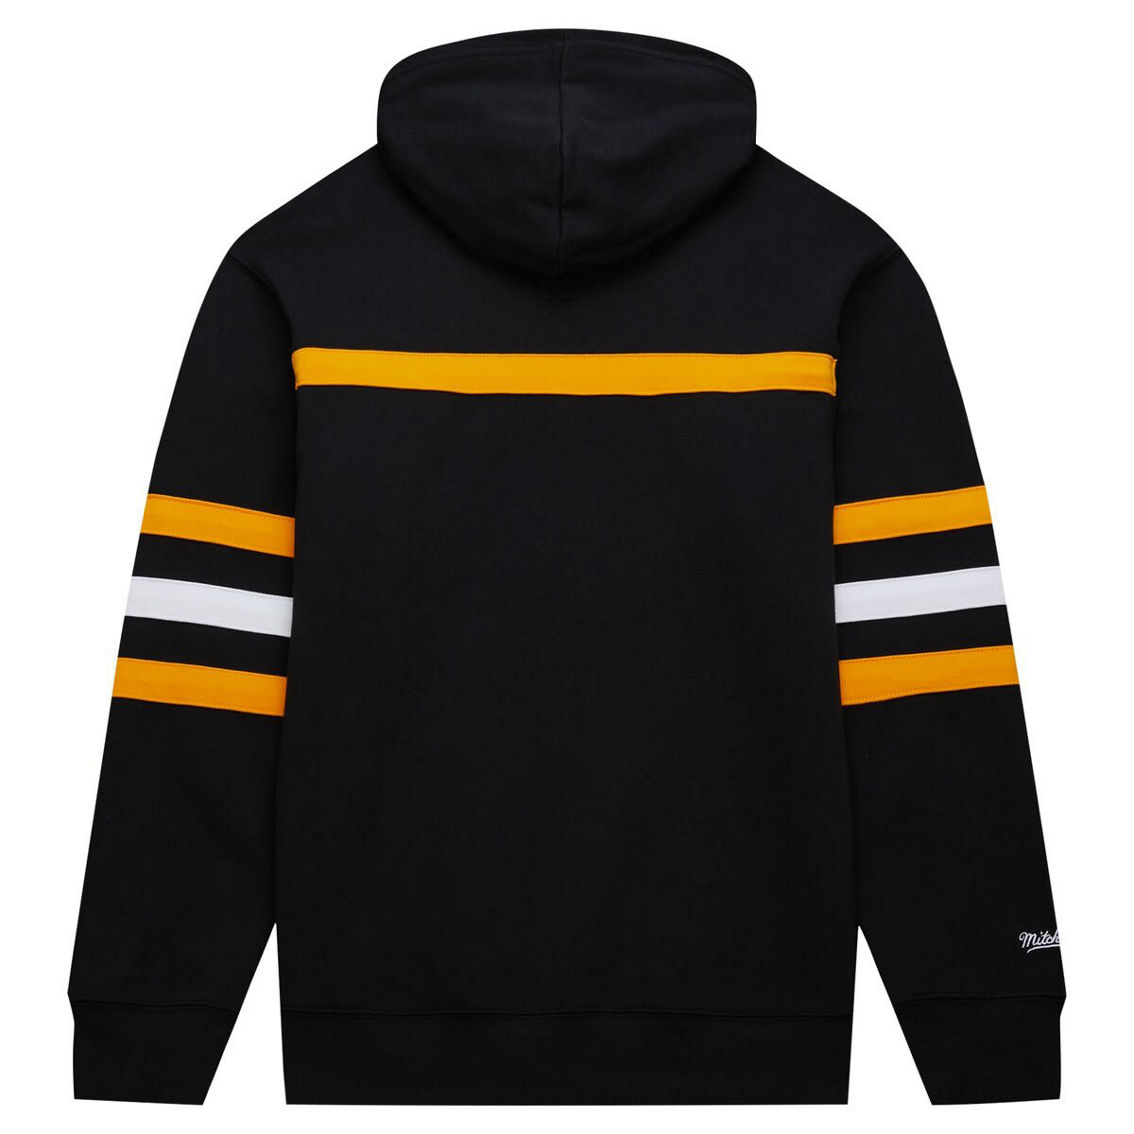 Mitchell & Ness Men's Black Boston Bruins Head Coach Pullover Hoodie - Image 4 of 4